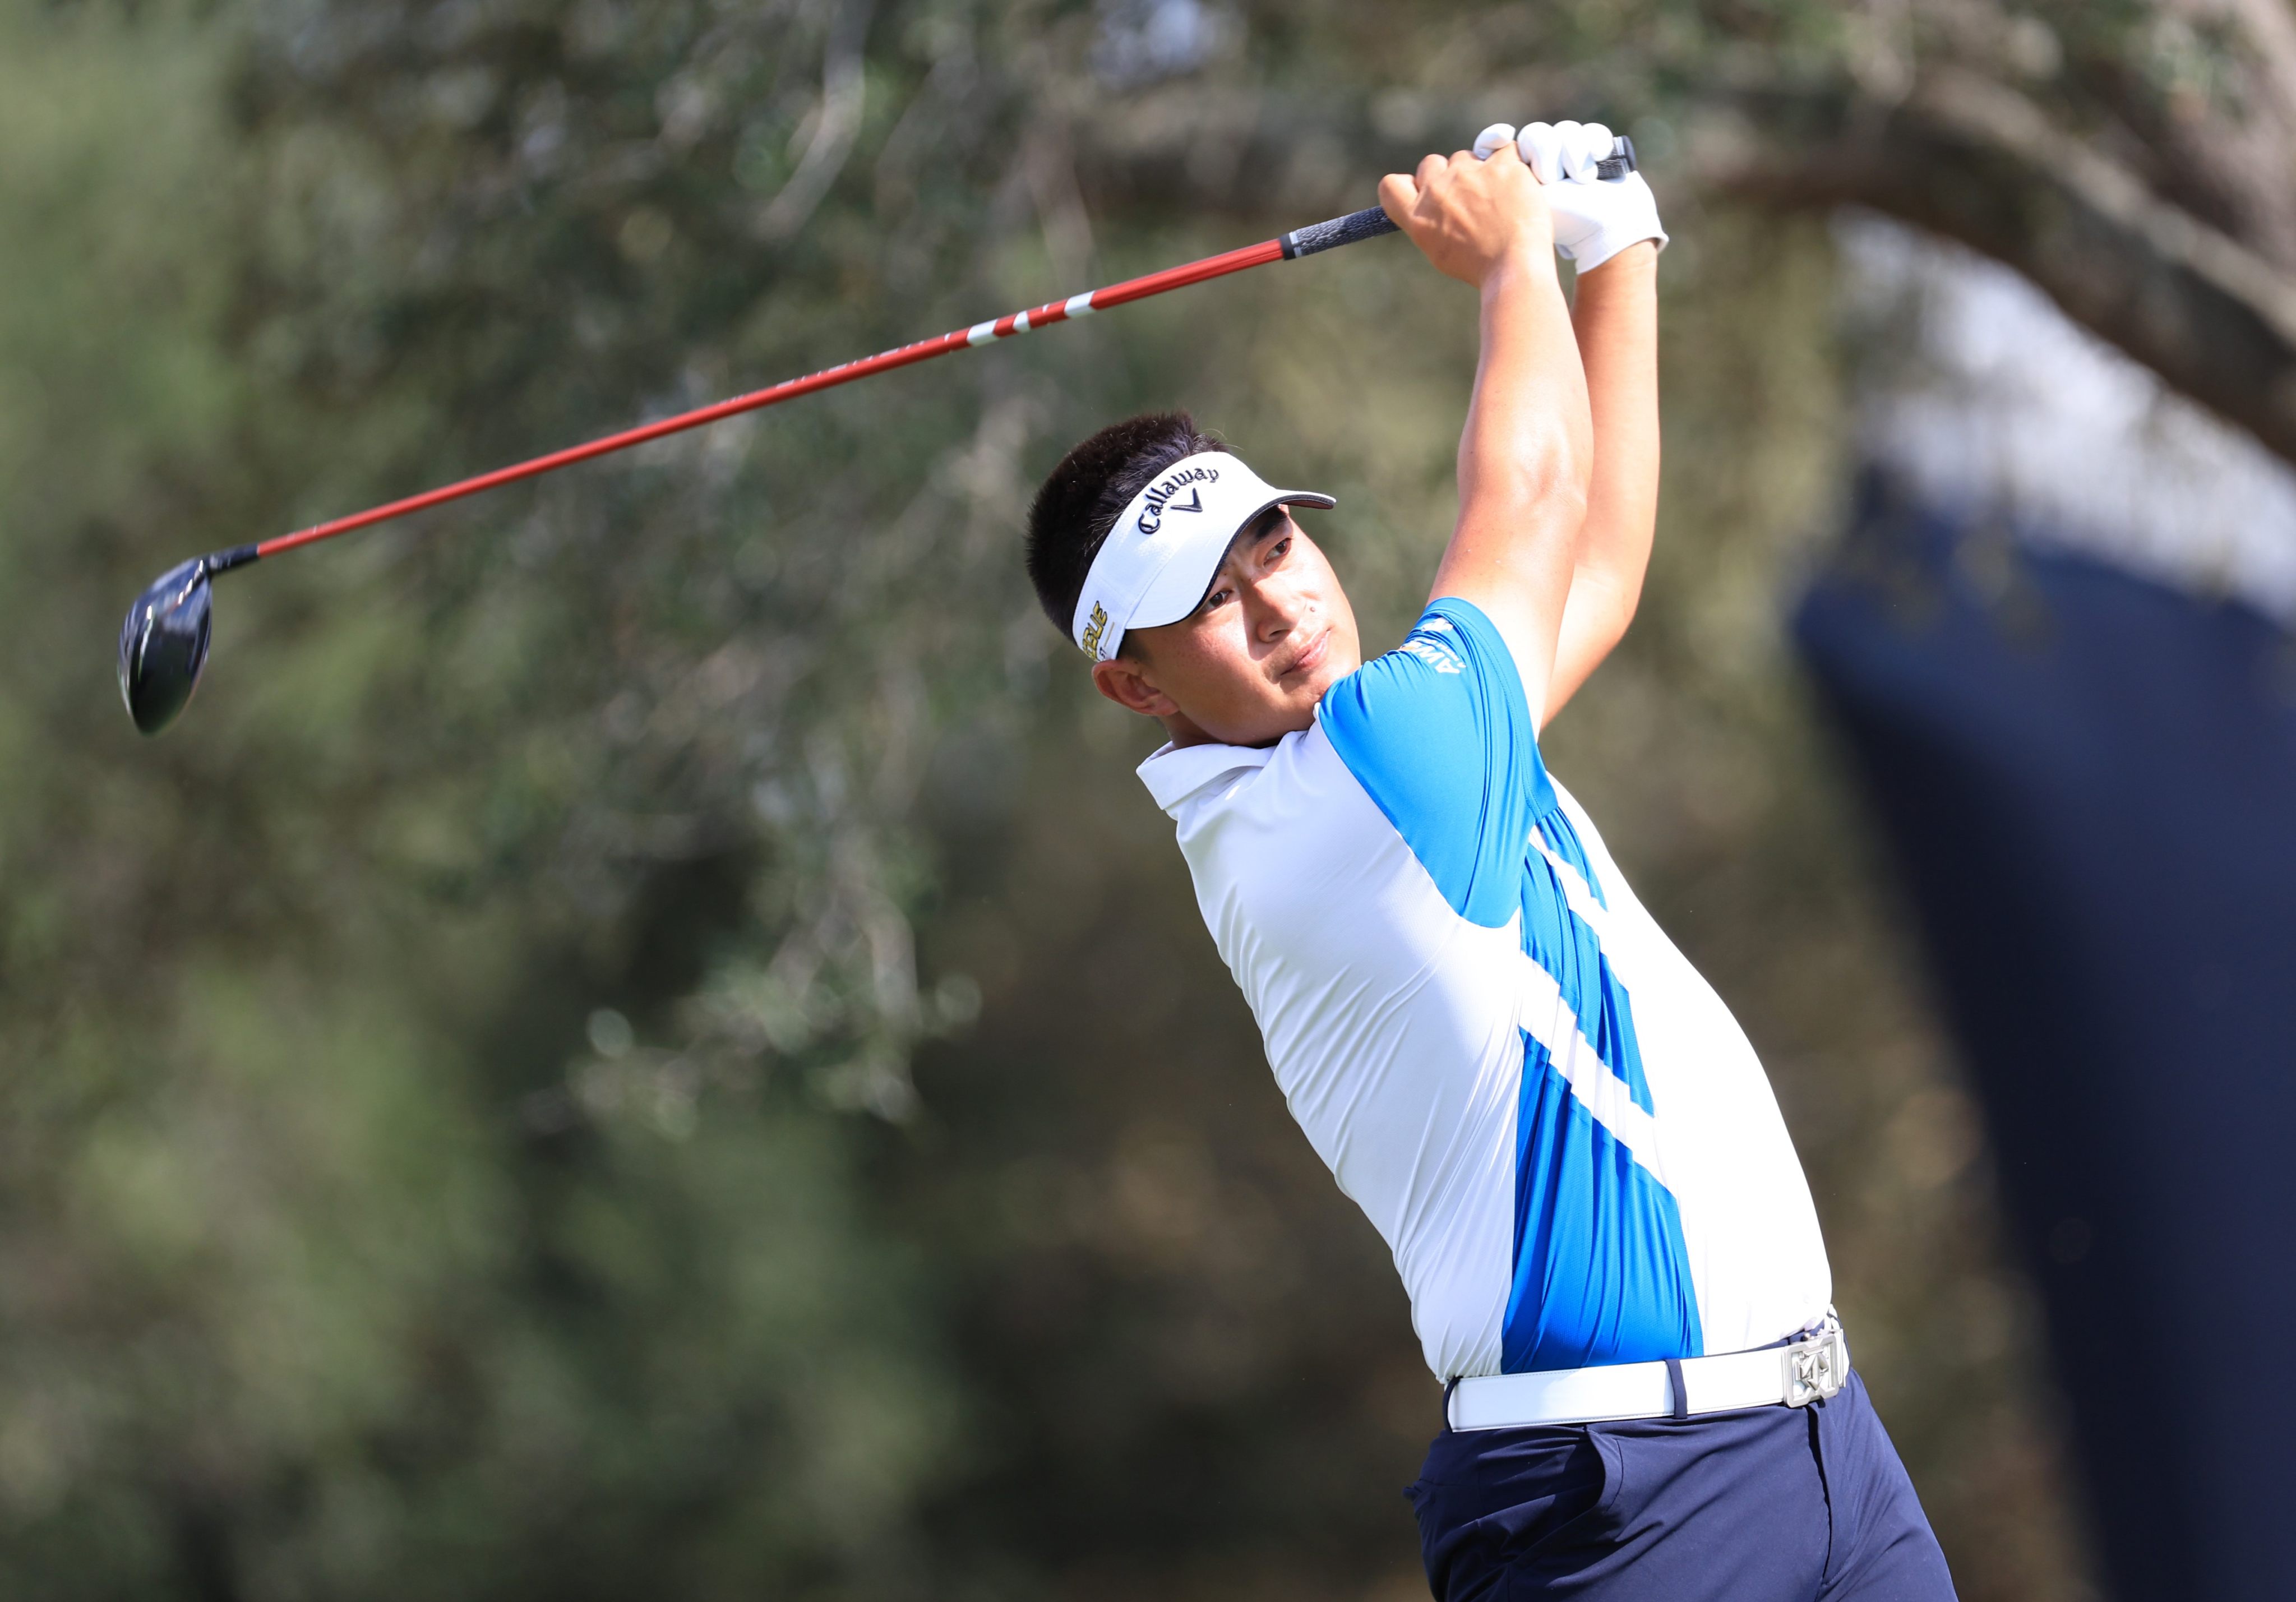 Carl Yuan tees off on the first at the start of his opening round at the Houston Open. Photo: AFP